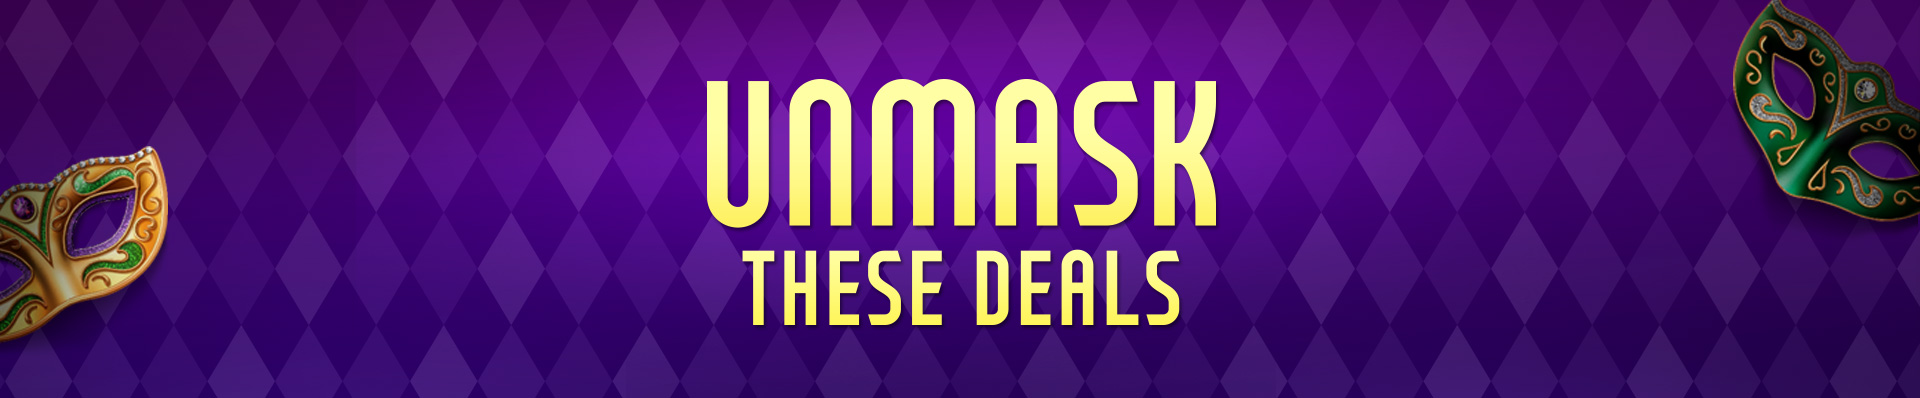 UNMASK THESE DEALS